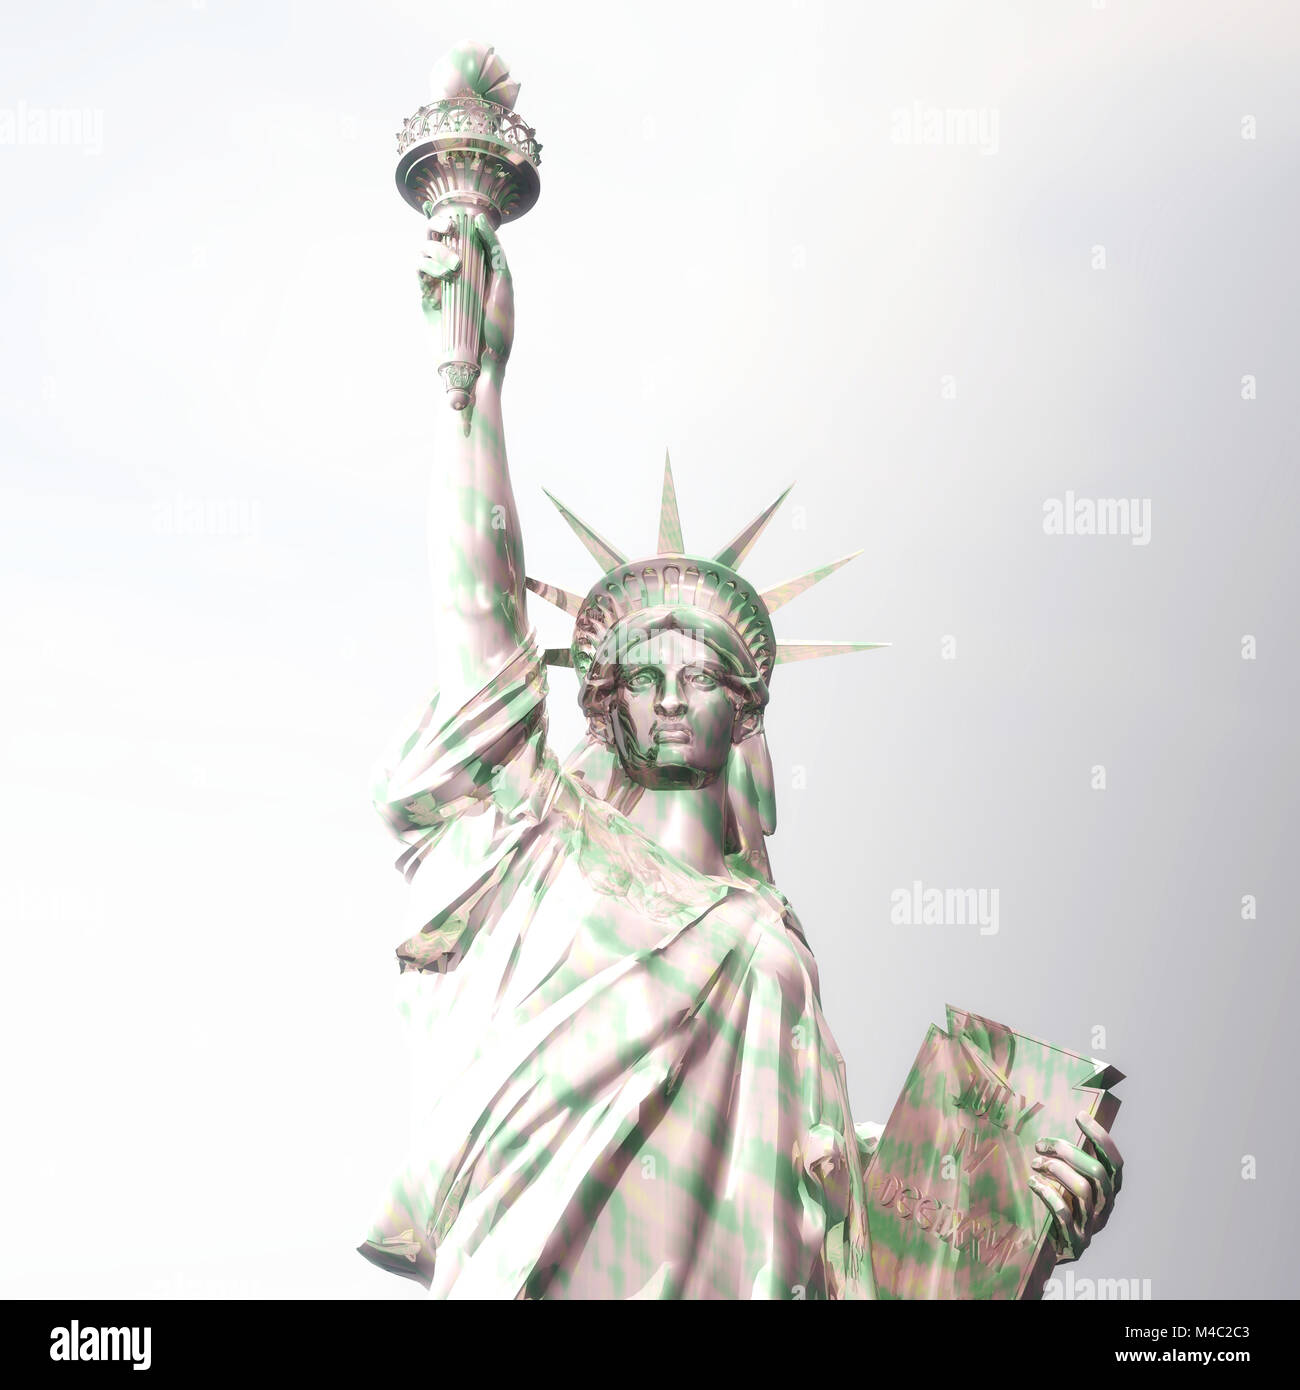 Digital Rendering of the Statue of Liberty Stock Photo